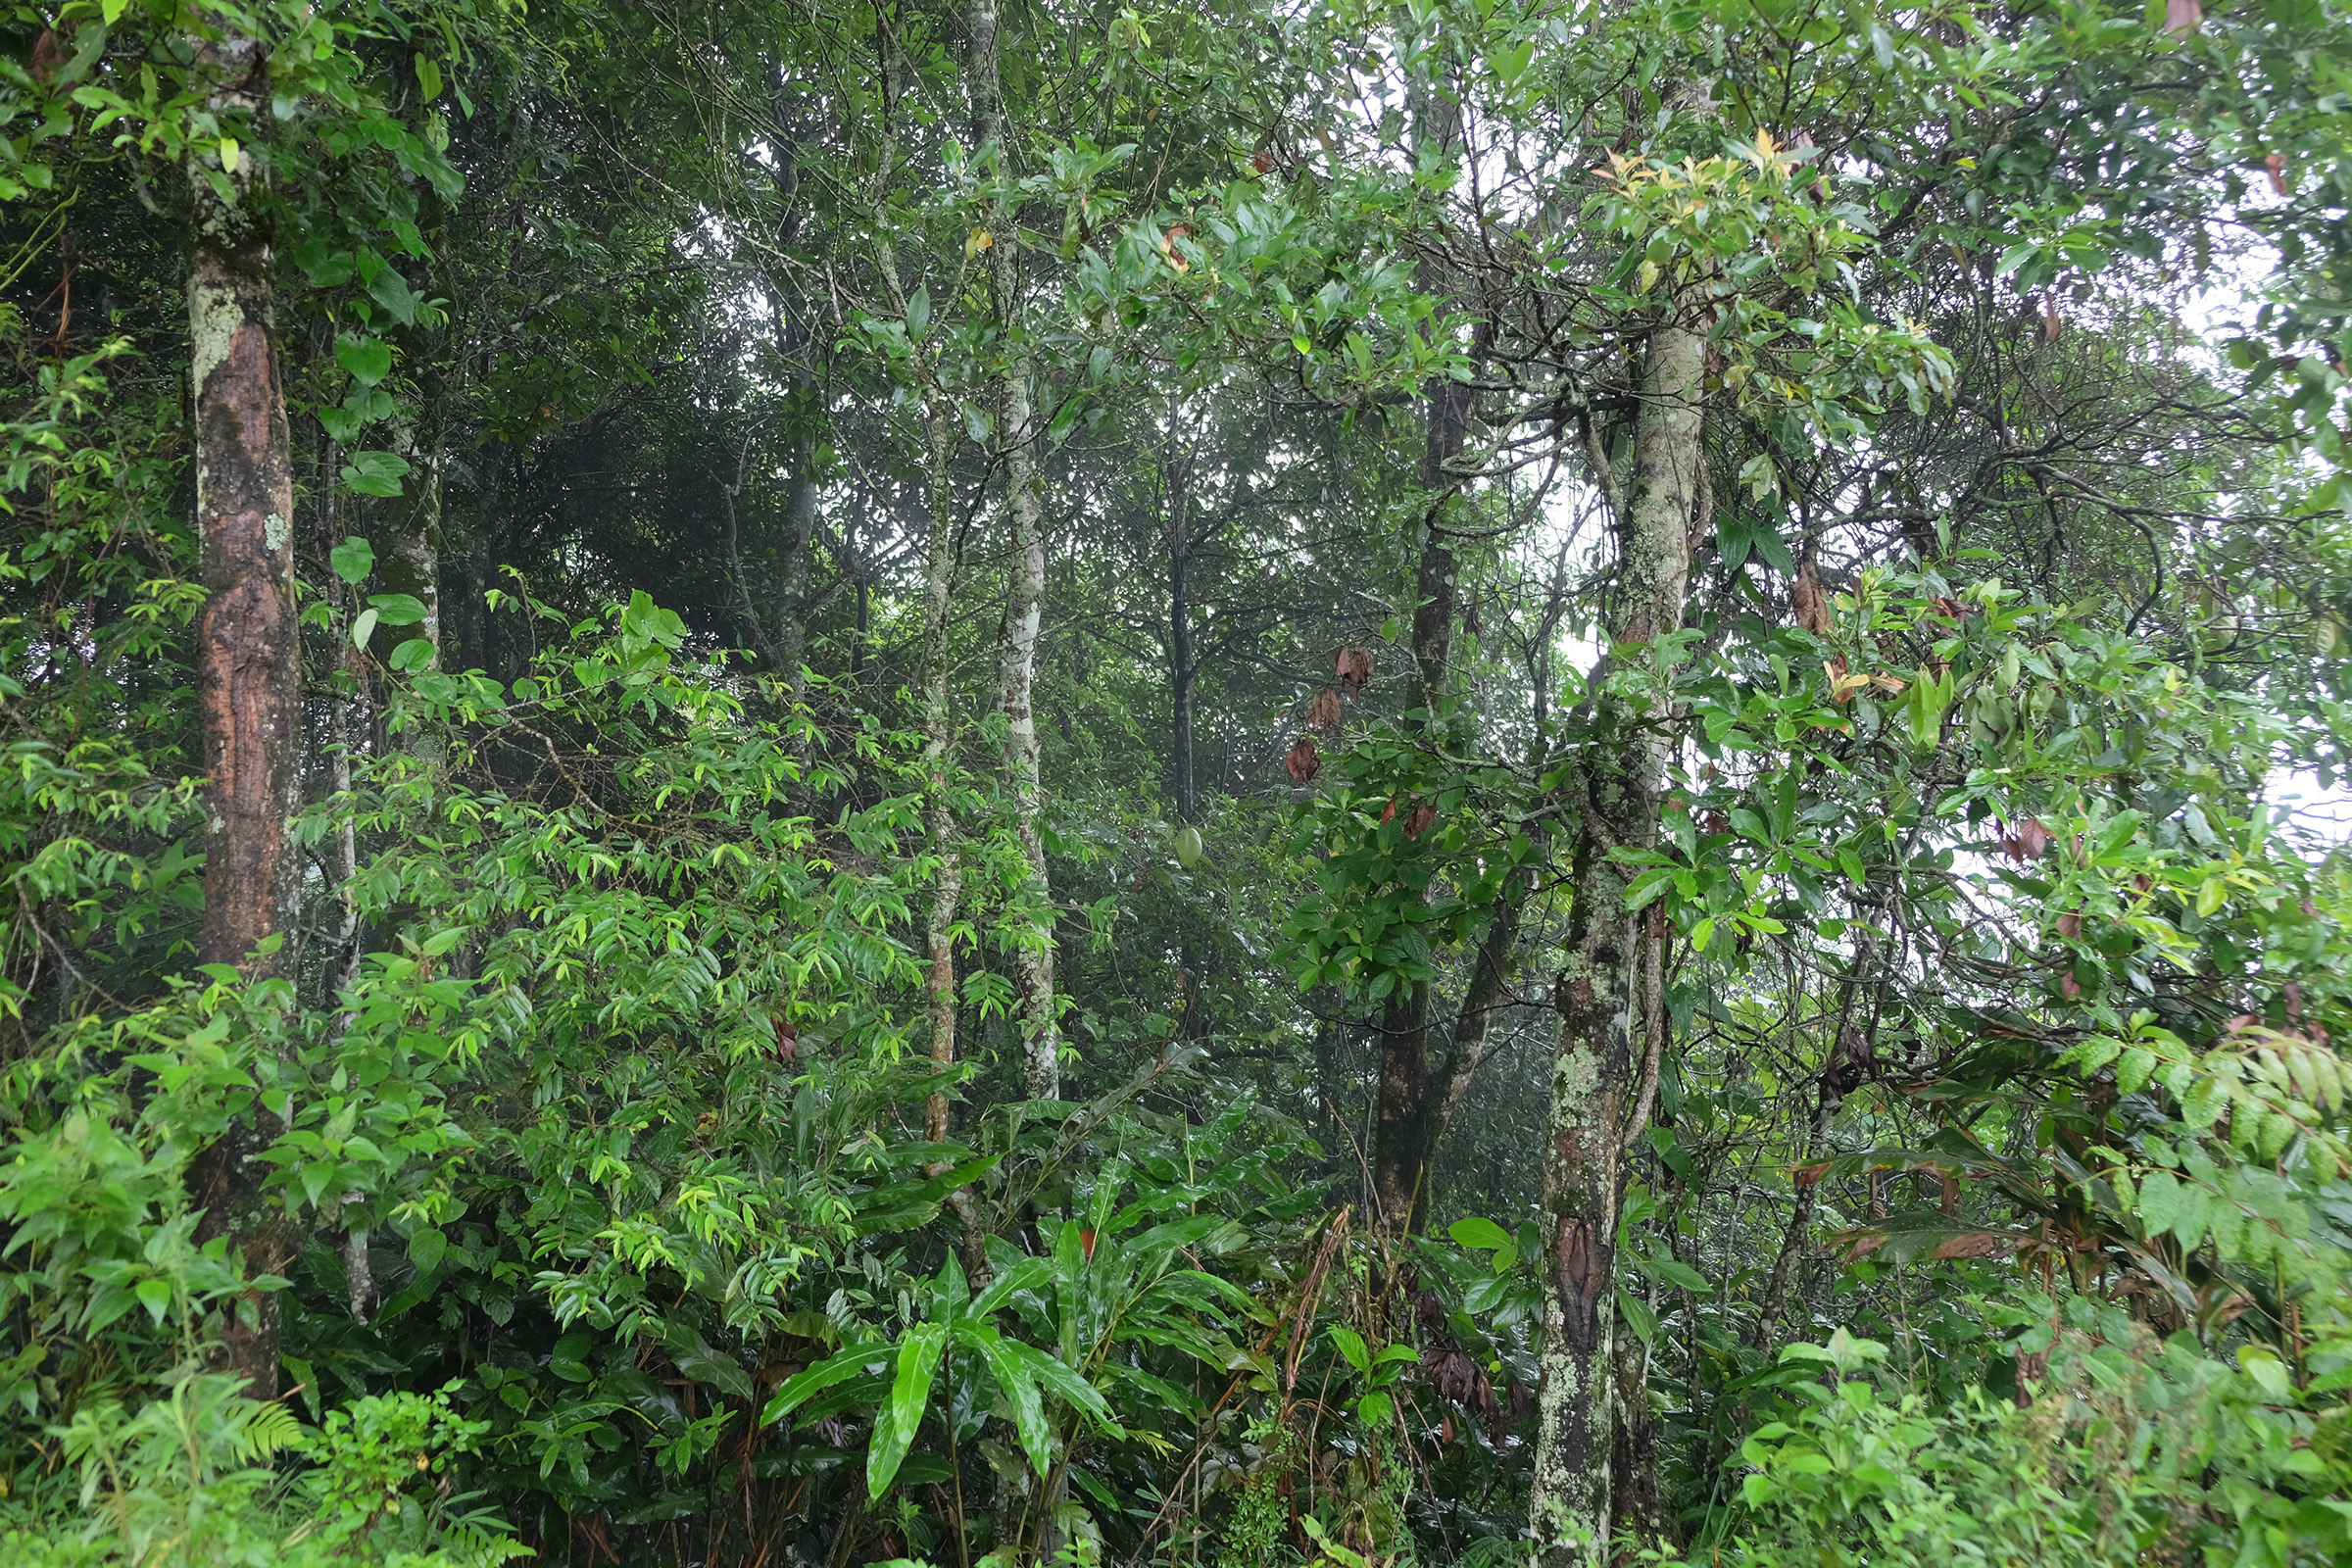 Financing forest action: investing in forests to address the climate crisis 